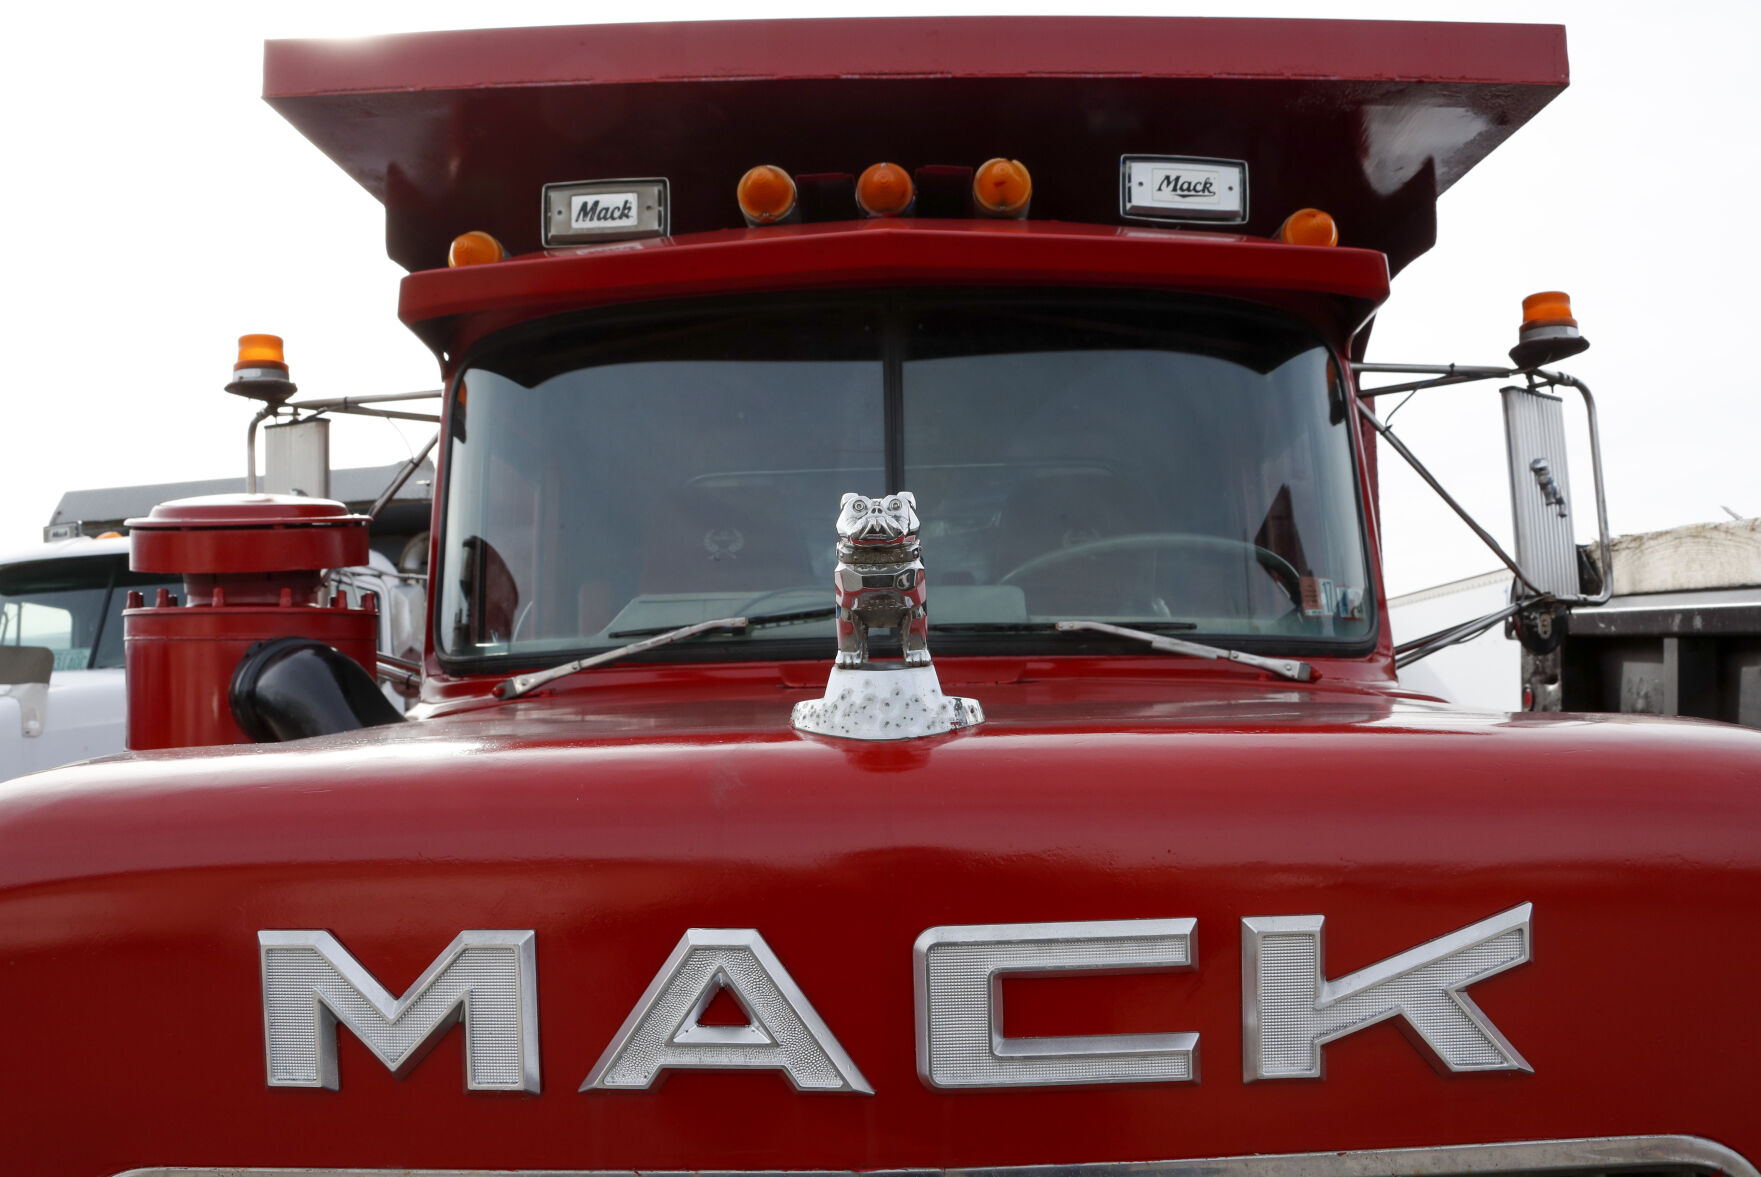 <p>File - A hood ornament is seen on a used Mack truck on a lot in Evans City, Pa., Jan. 9, 2020. Union workers at Mack Trucks have voted down a tentative five-year contract agreement reached with the company. (AP Photo/Keith Srakocic, File)</p>   PHOTO CREDIT: Keith Srakocic 